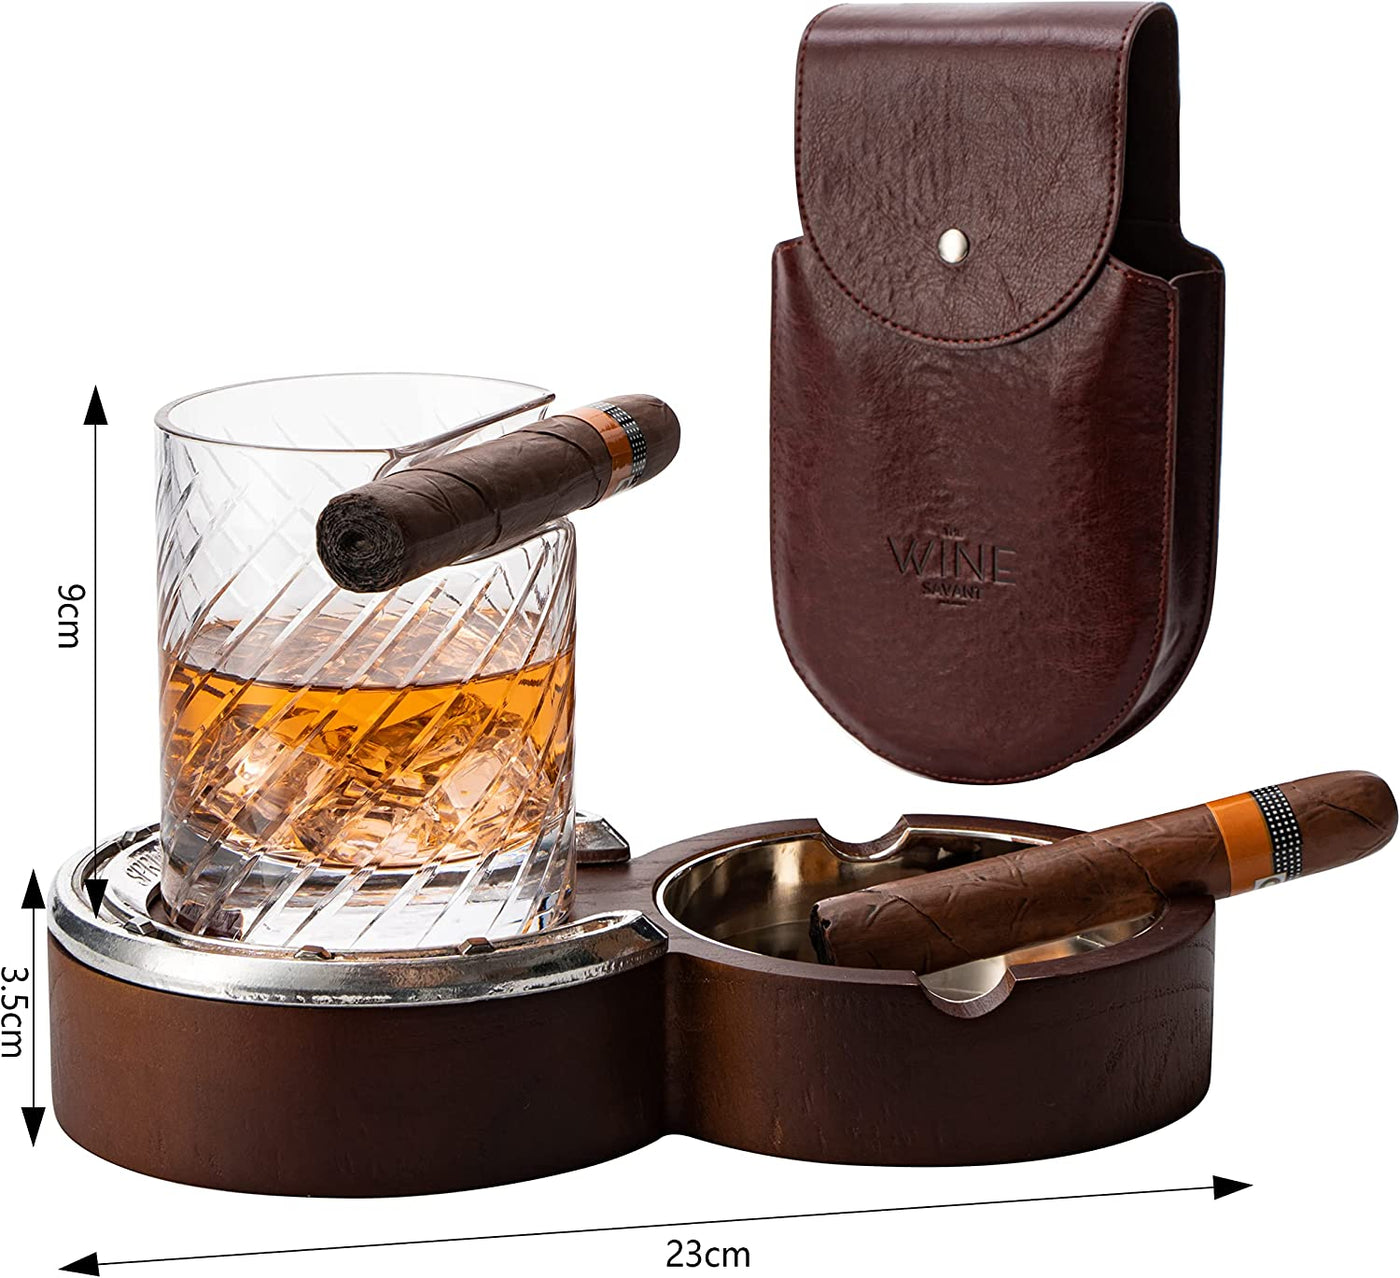 Liquor Lux Luxurious Cigar Glass - In A Leather Horseshoe Storage Case Whiskey Glassware with Cigar Holder - 10oz Cigar Holder Whiskey, Ash Tray - Dad, Men Home Office, Leather Gifts